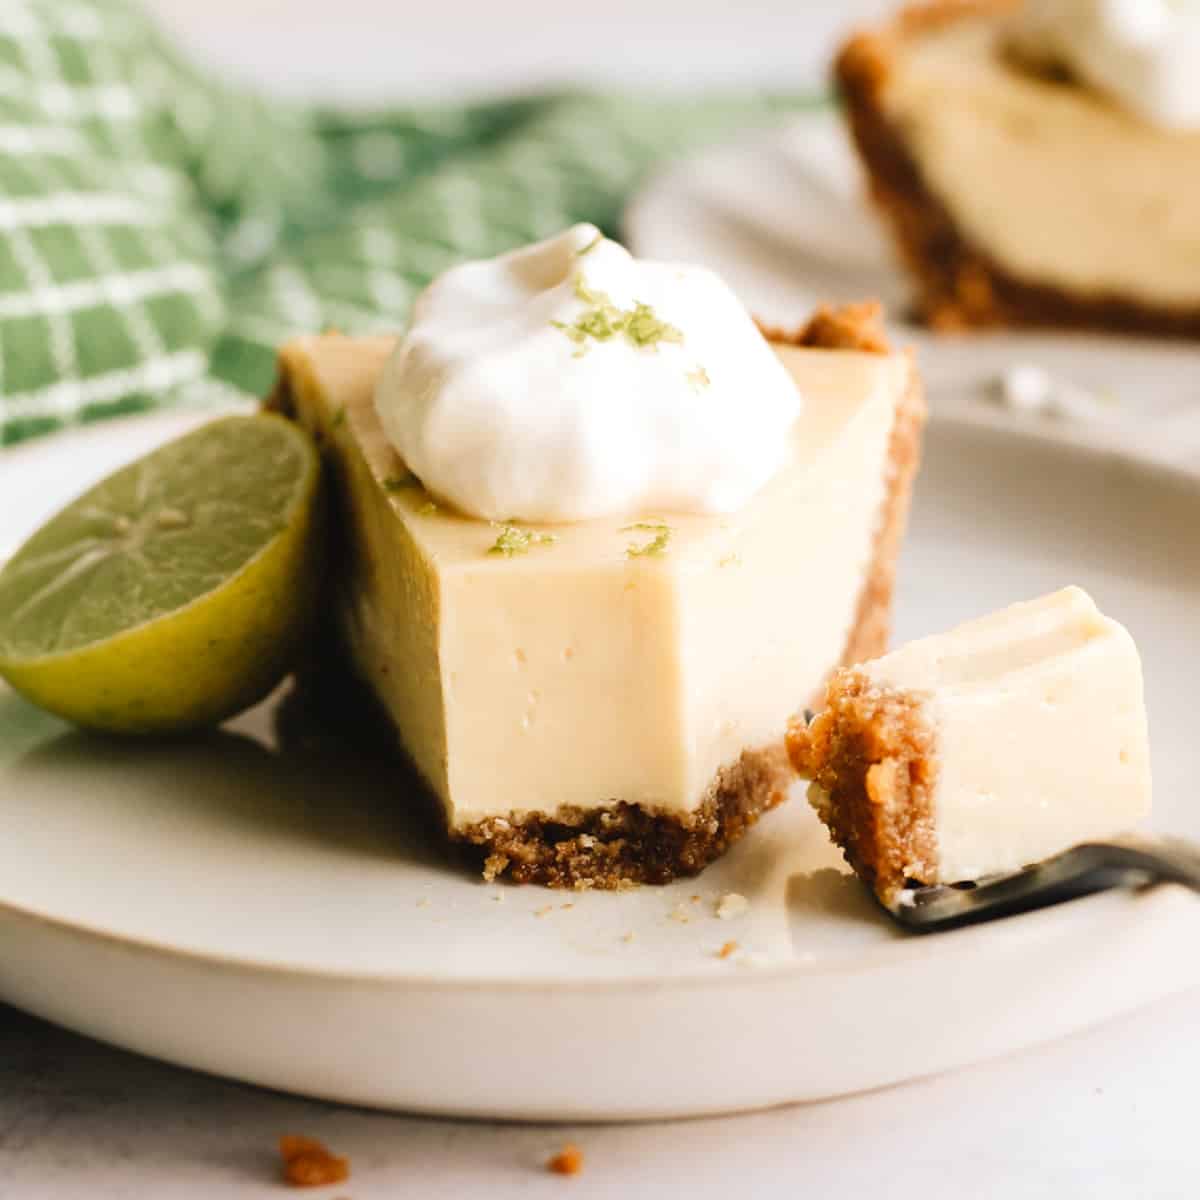 a piece of key lime pie on a plate with a bite taken out of it